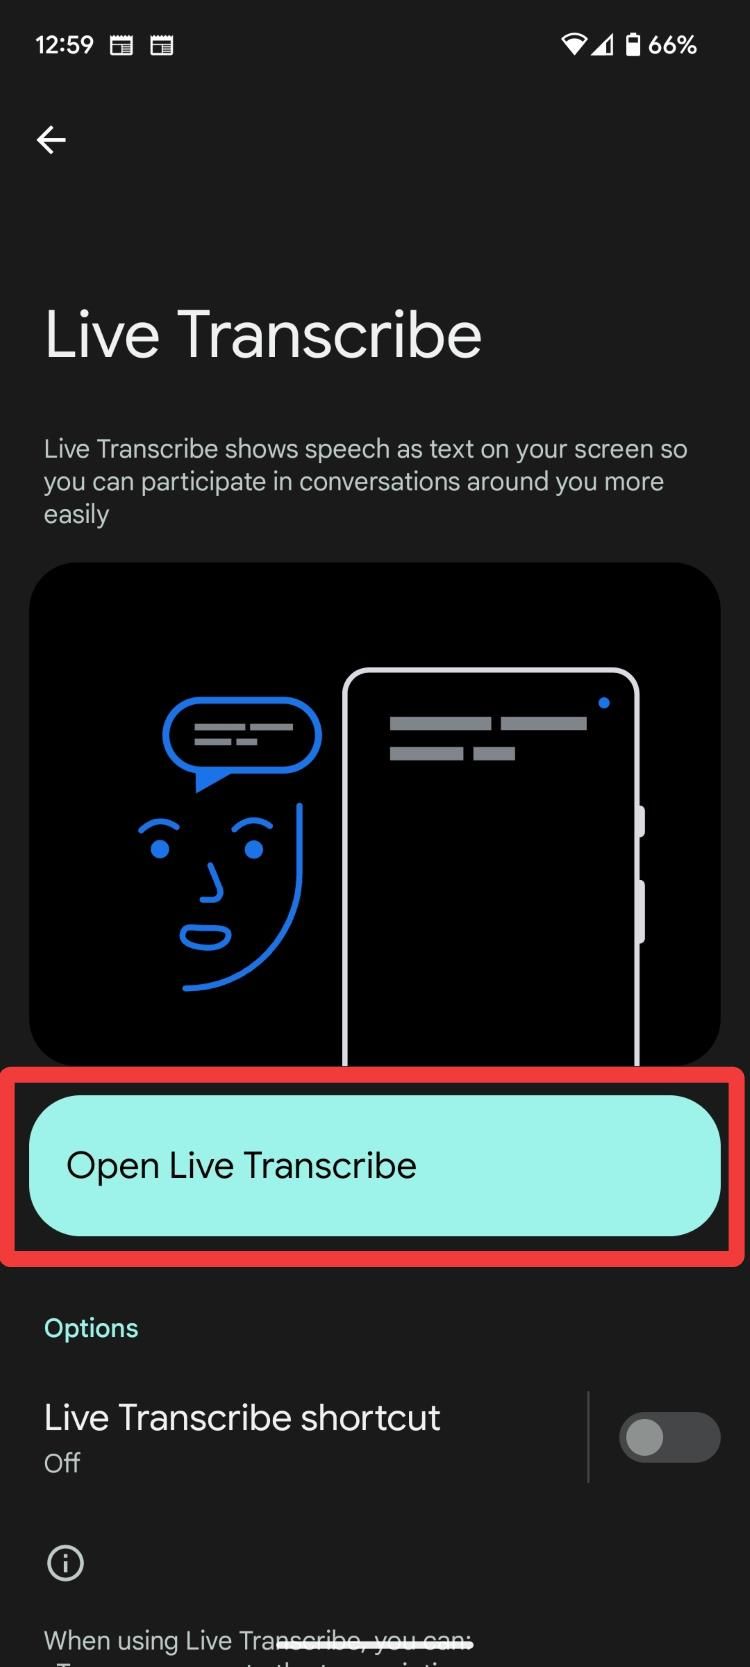 Launch Live Transcribe in Pixel